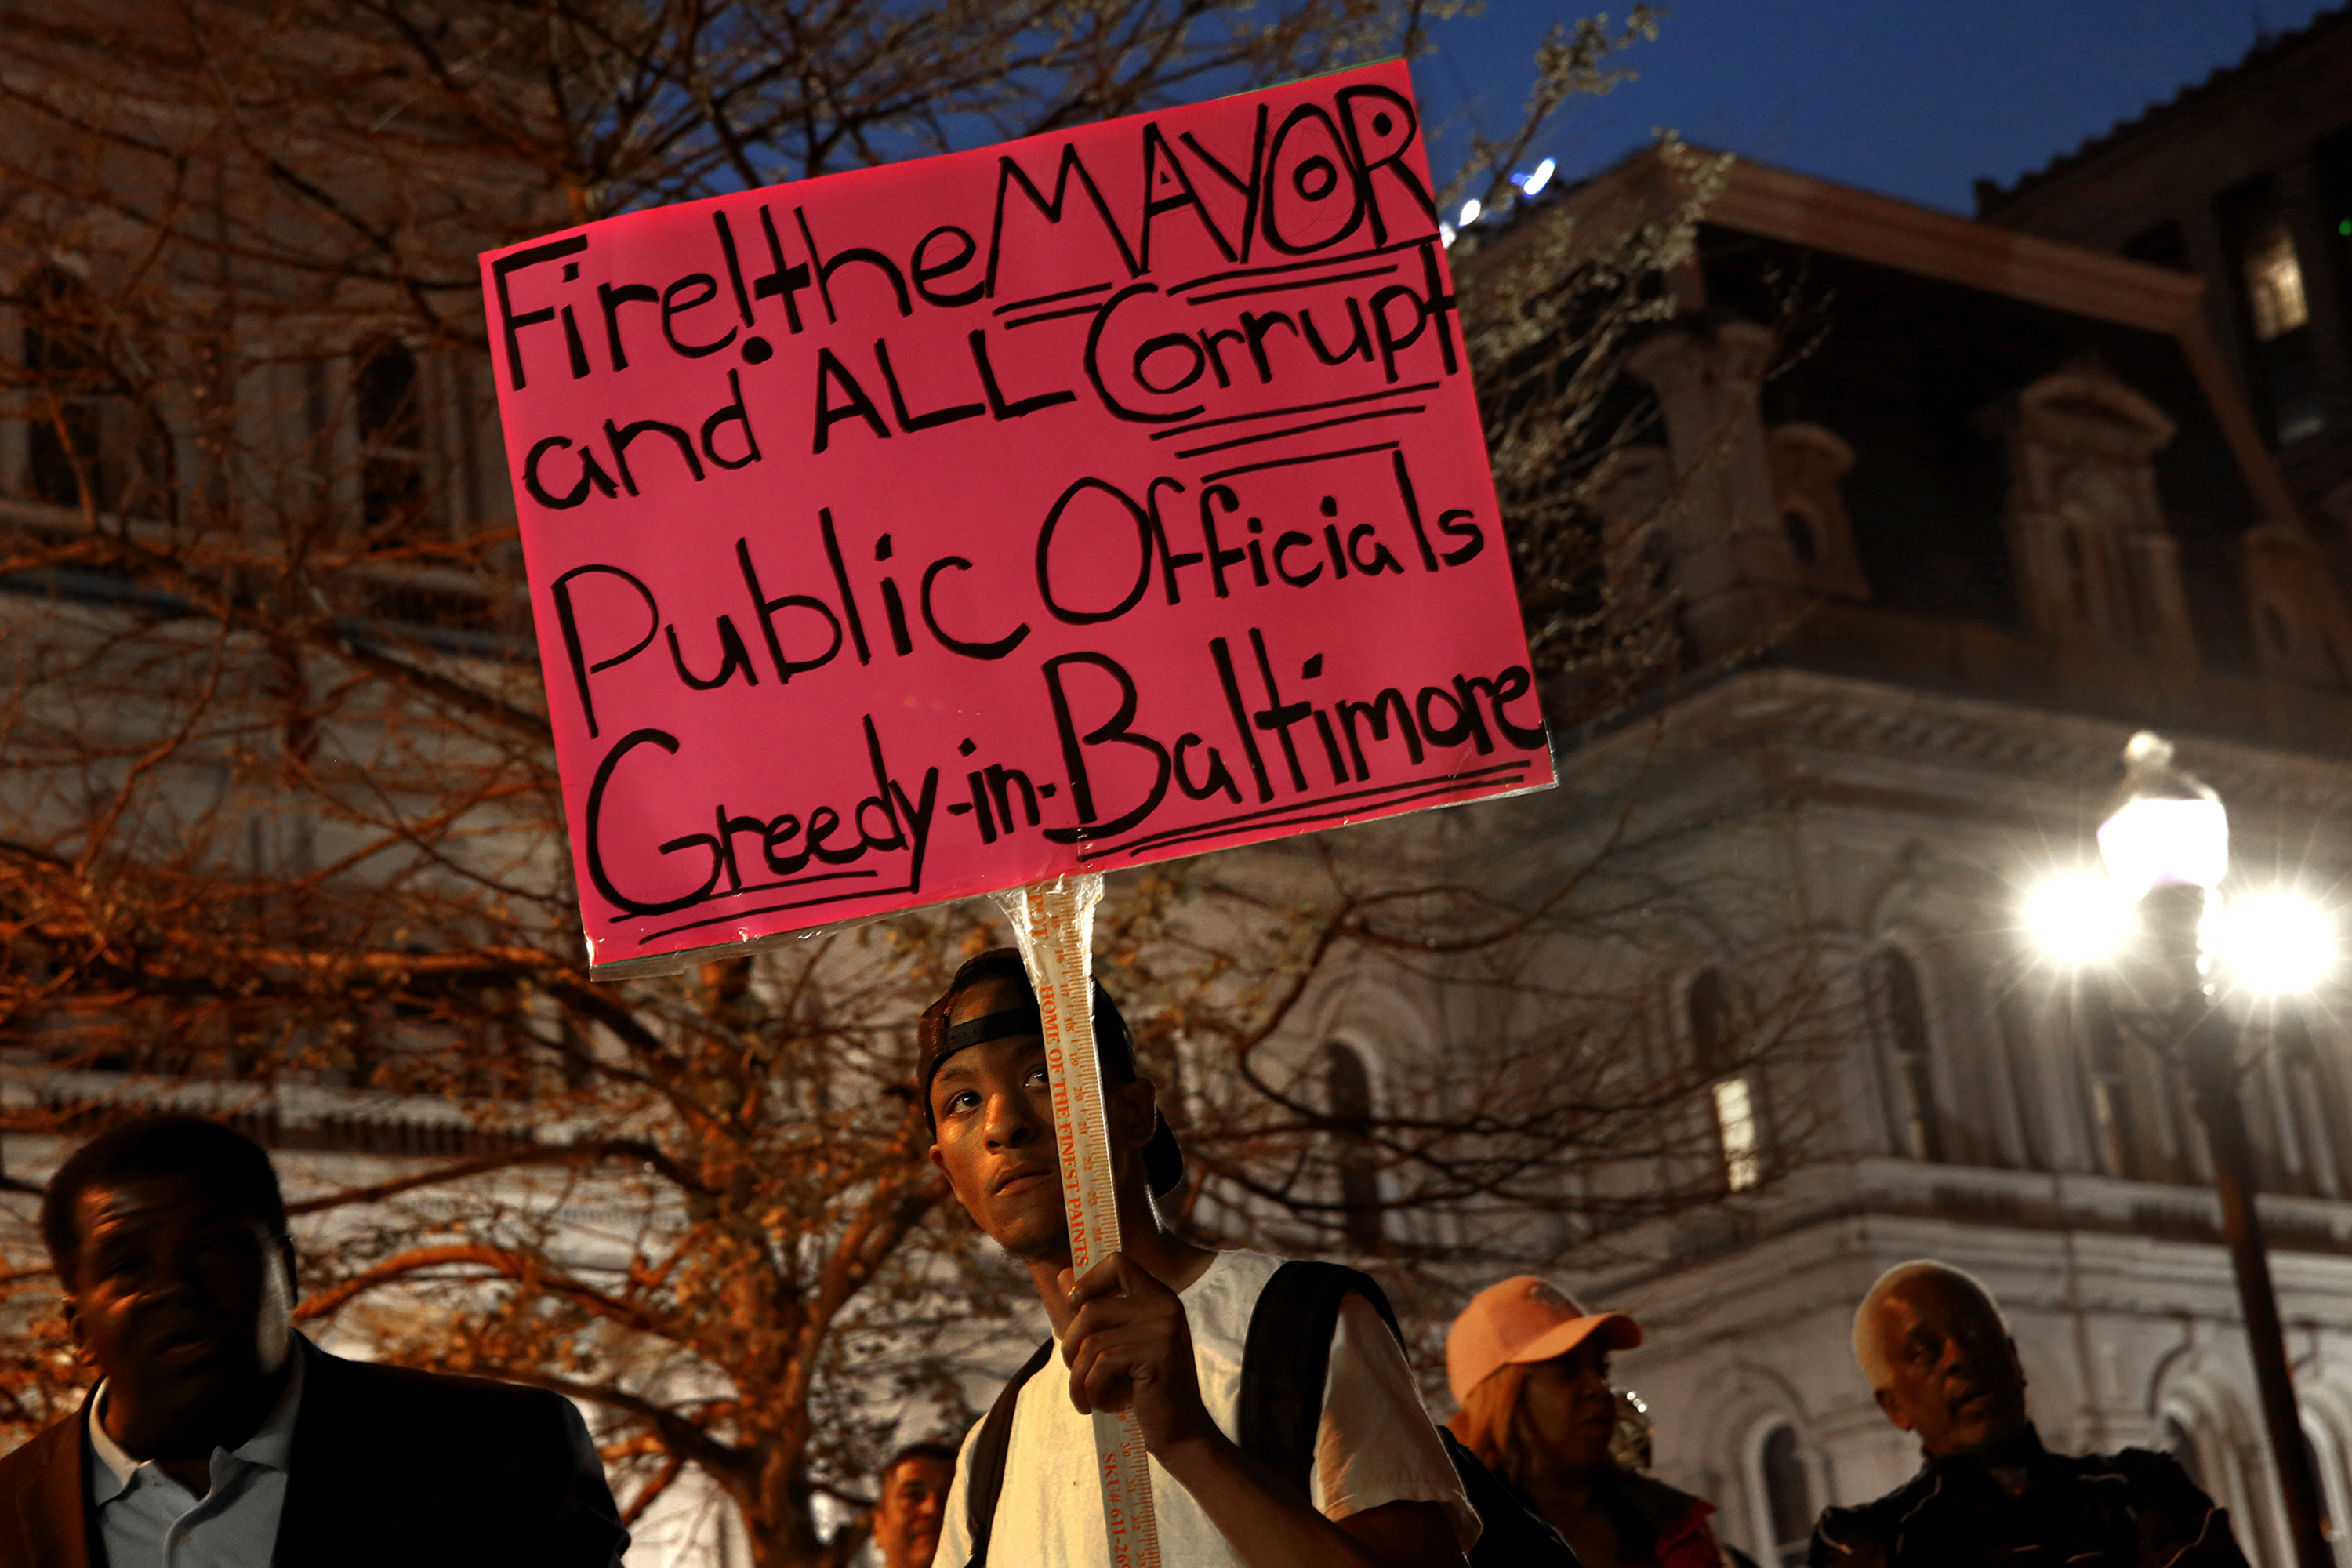 People gather at Baltimore City Hall on Wednesday, April 28, 2015, voicing their displeasure after riots sparked by the death of Freddie Gray rocked the city. (Carolyn Cole/Los Angeles Times/TNS)